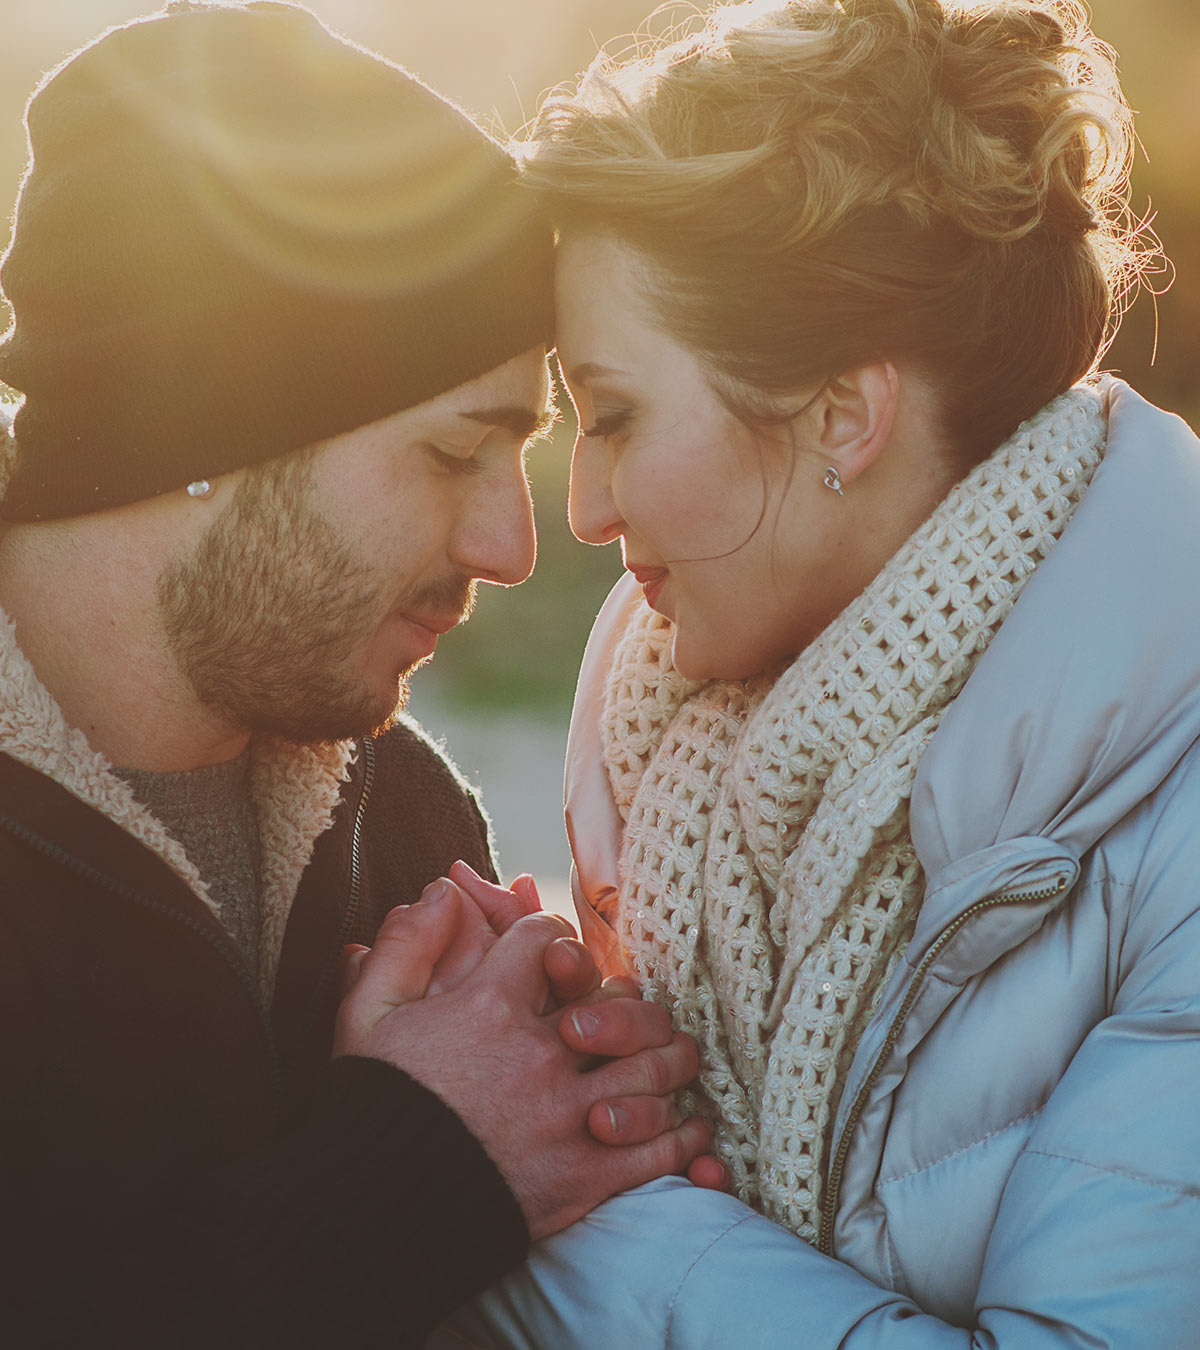 What Is Loyalty In A Relationship? 11 Ways To Strengthen It